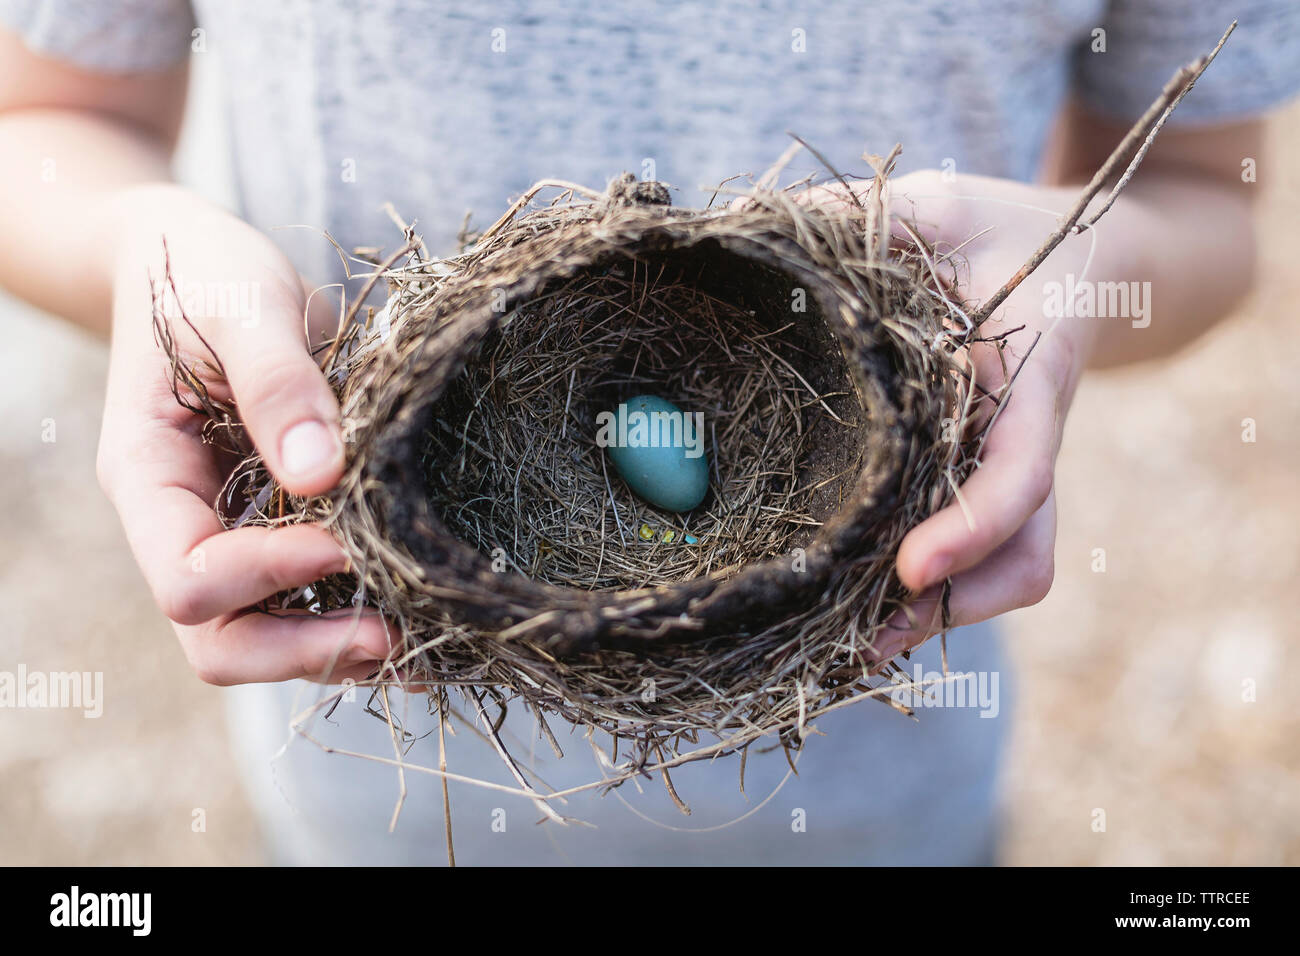 Midsection of boy holding blue egg in bird's nest Stock Photo